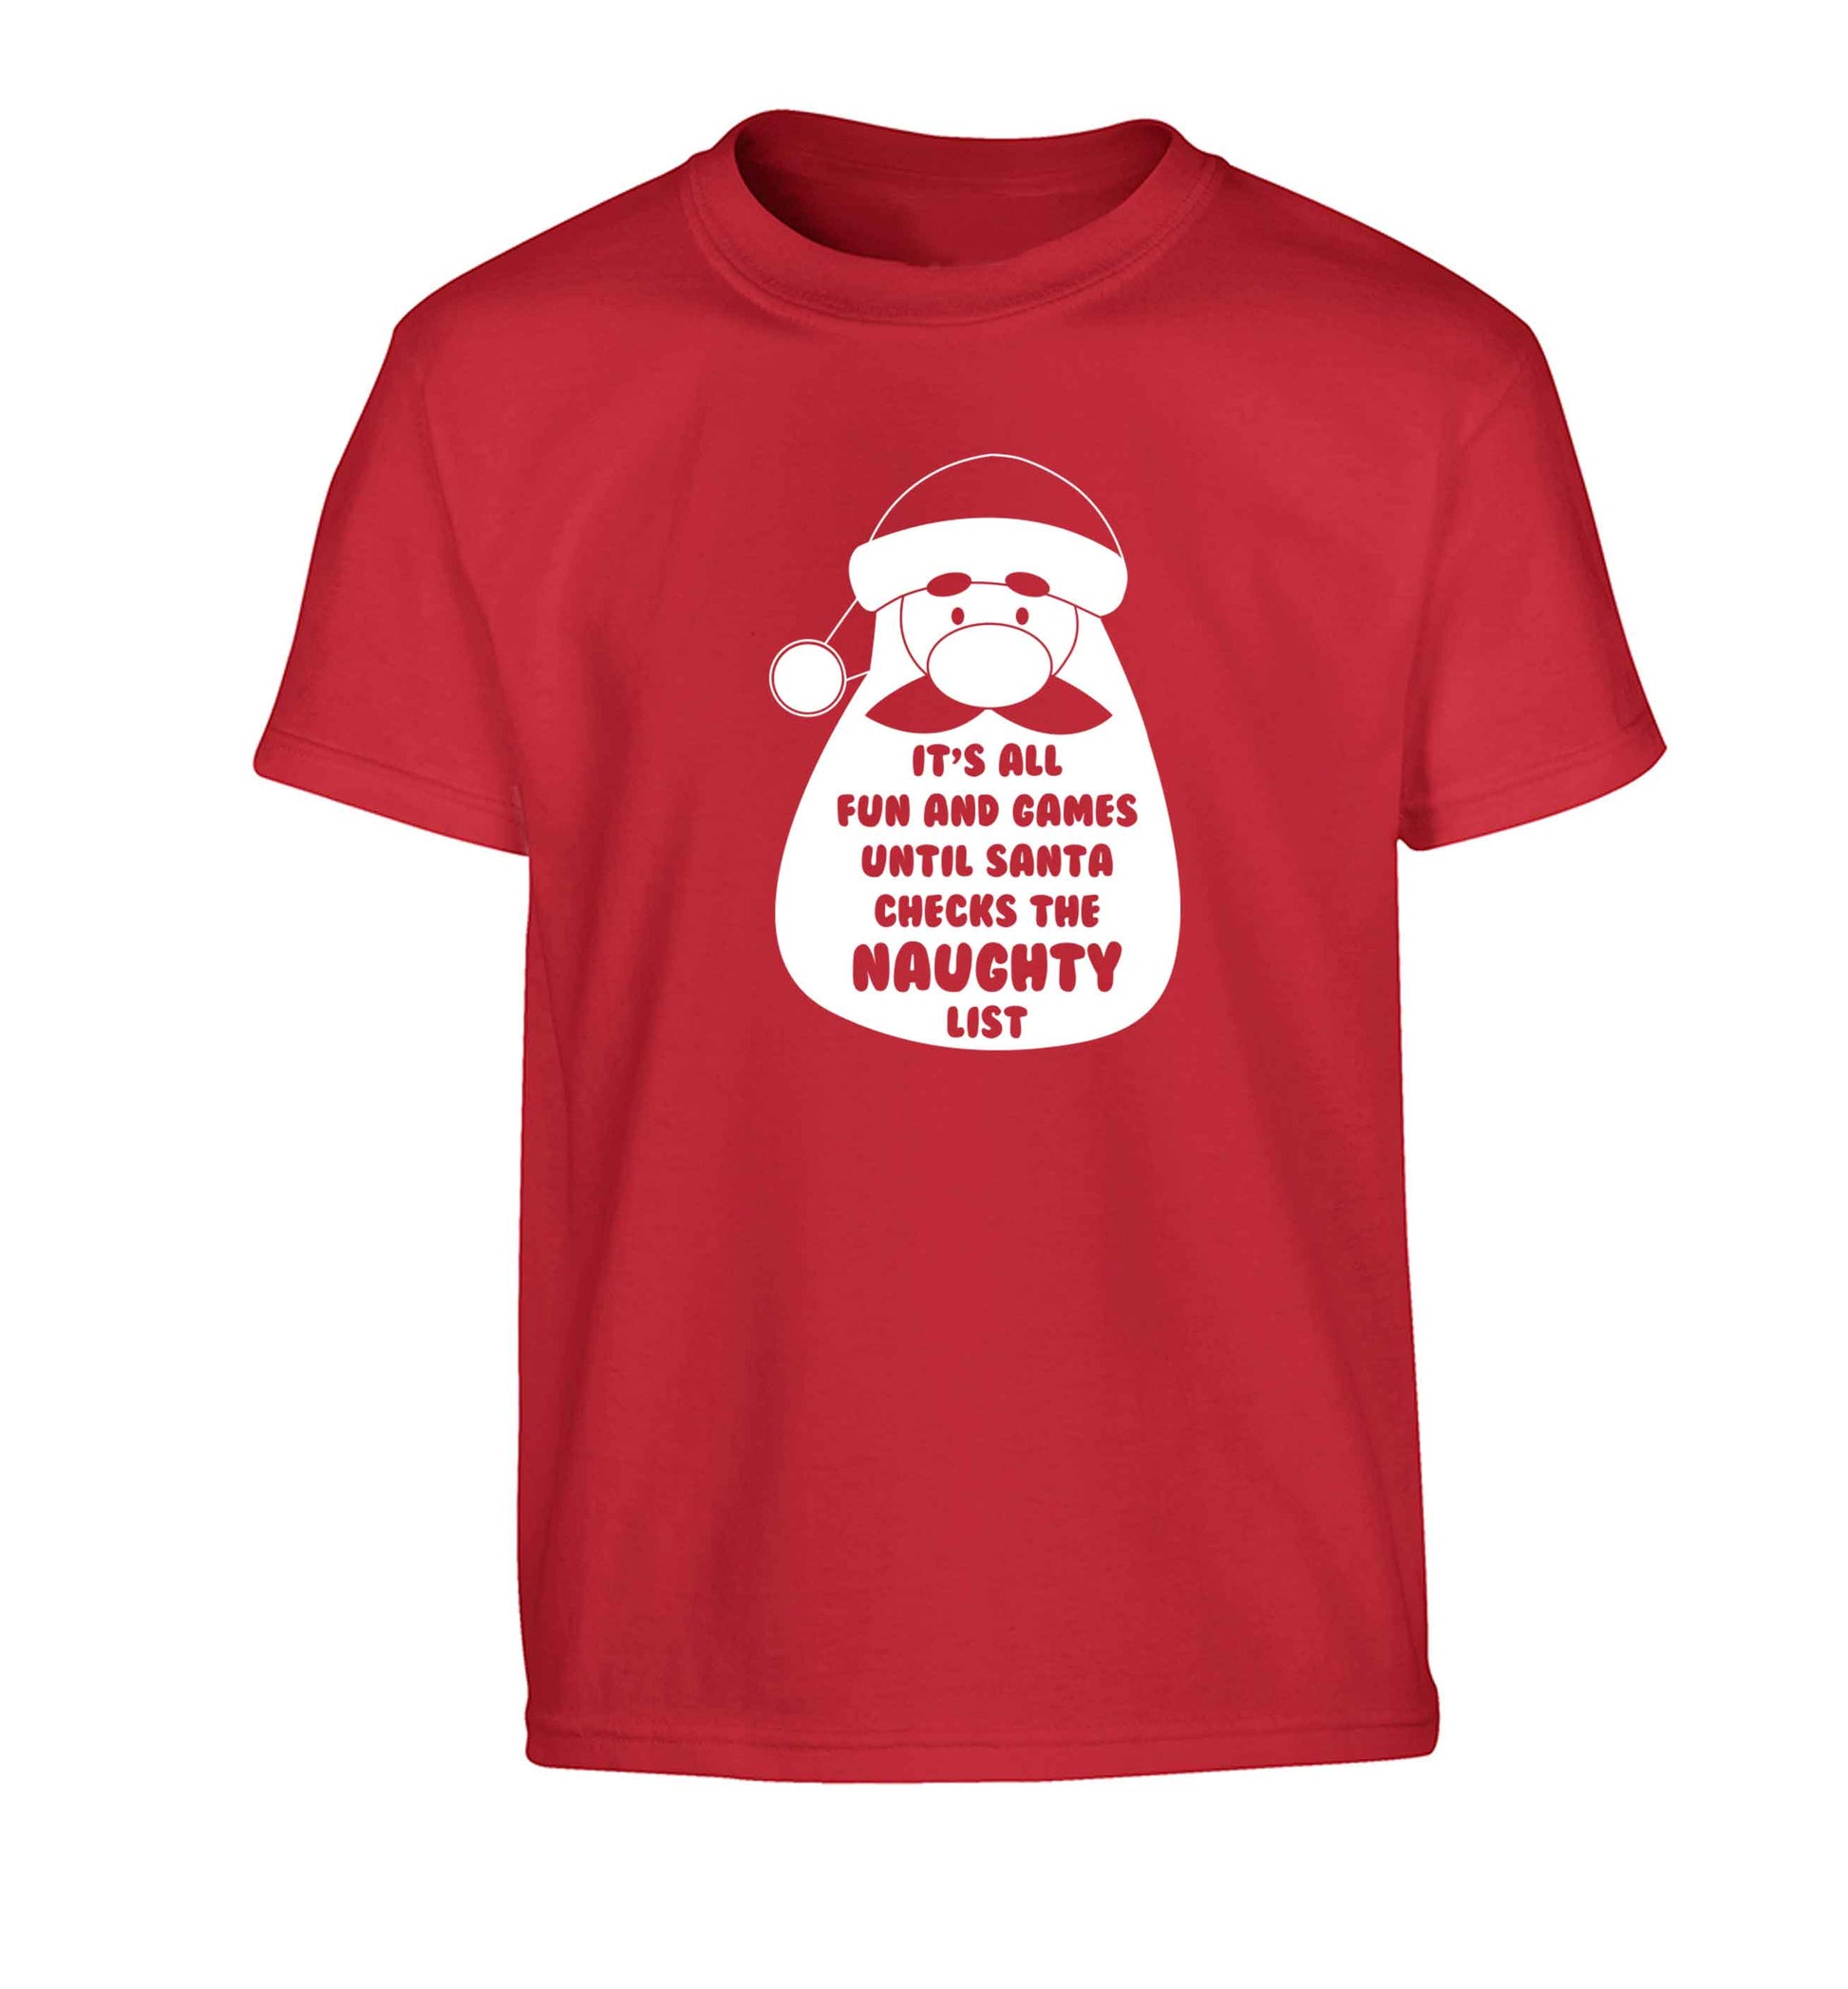 It's all fun and games until Santa checks the naughty list Children's red Tshirt 12-13 Years